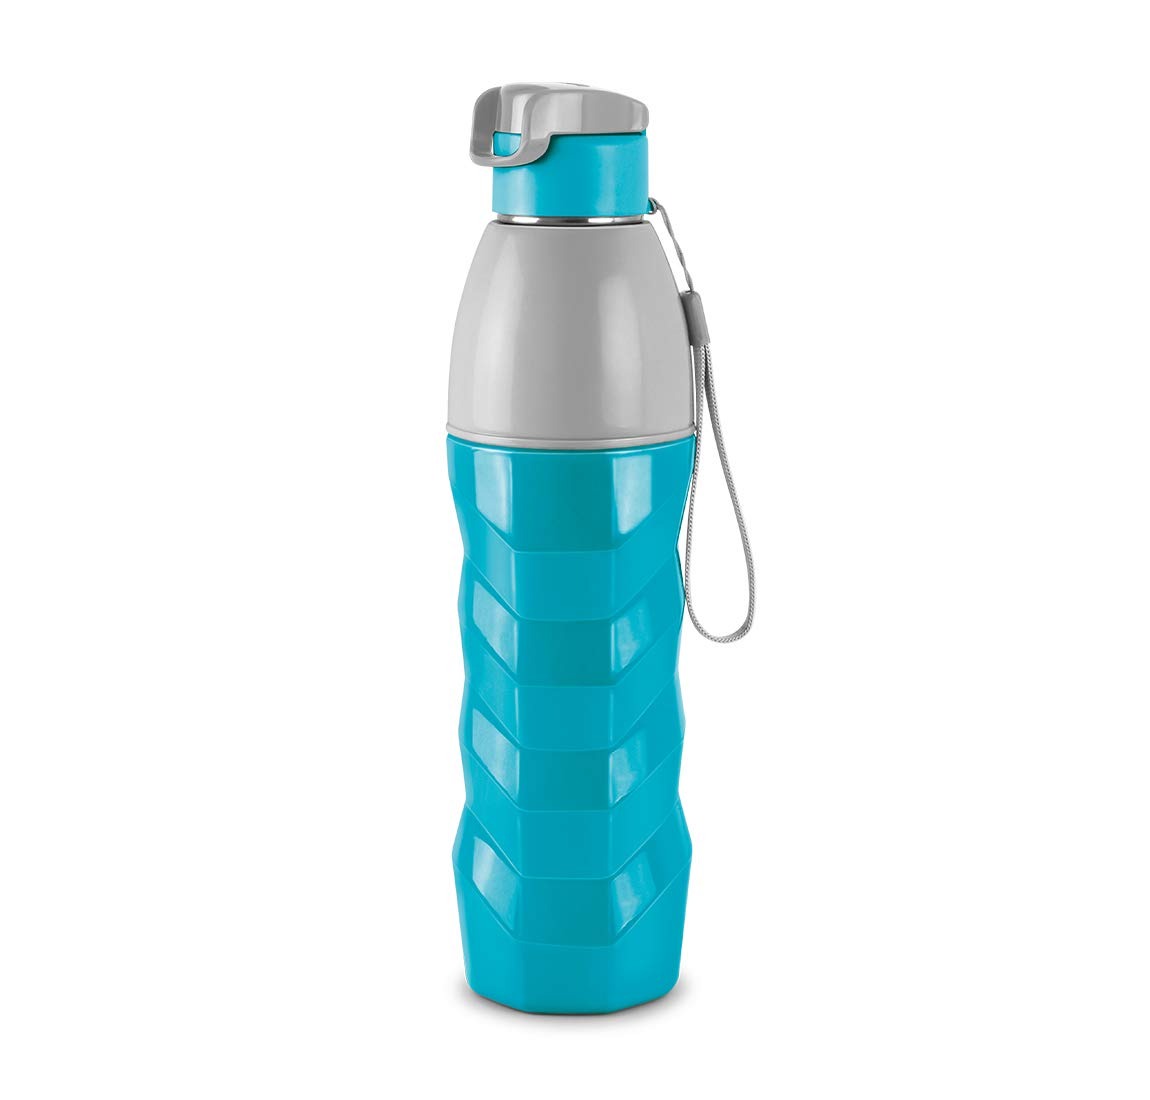 Milton Steel Racer Thermoware PU Insulated Stainless Steel Inner Water Bottle